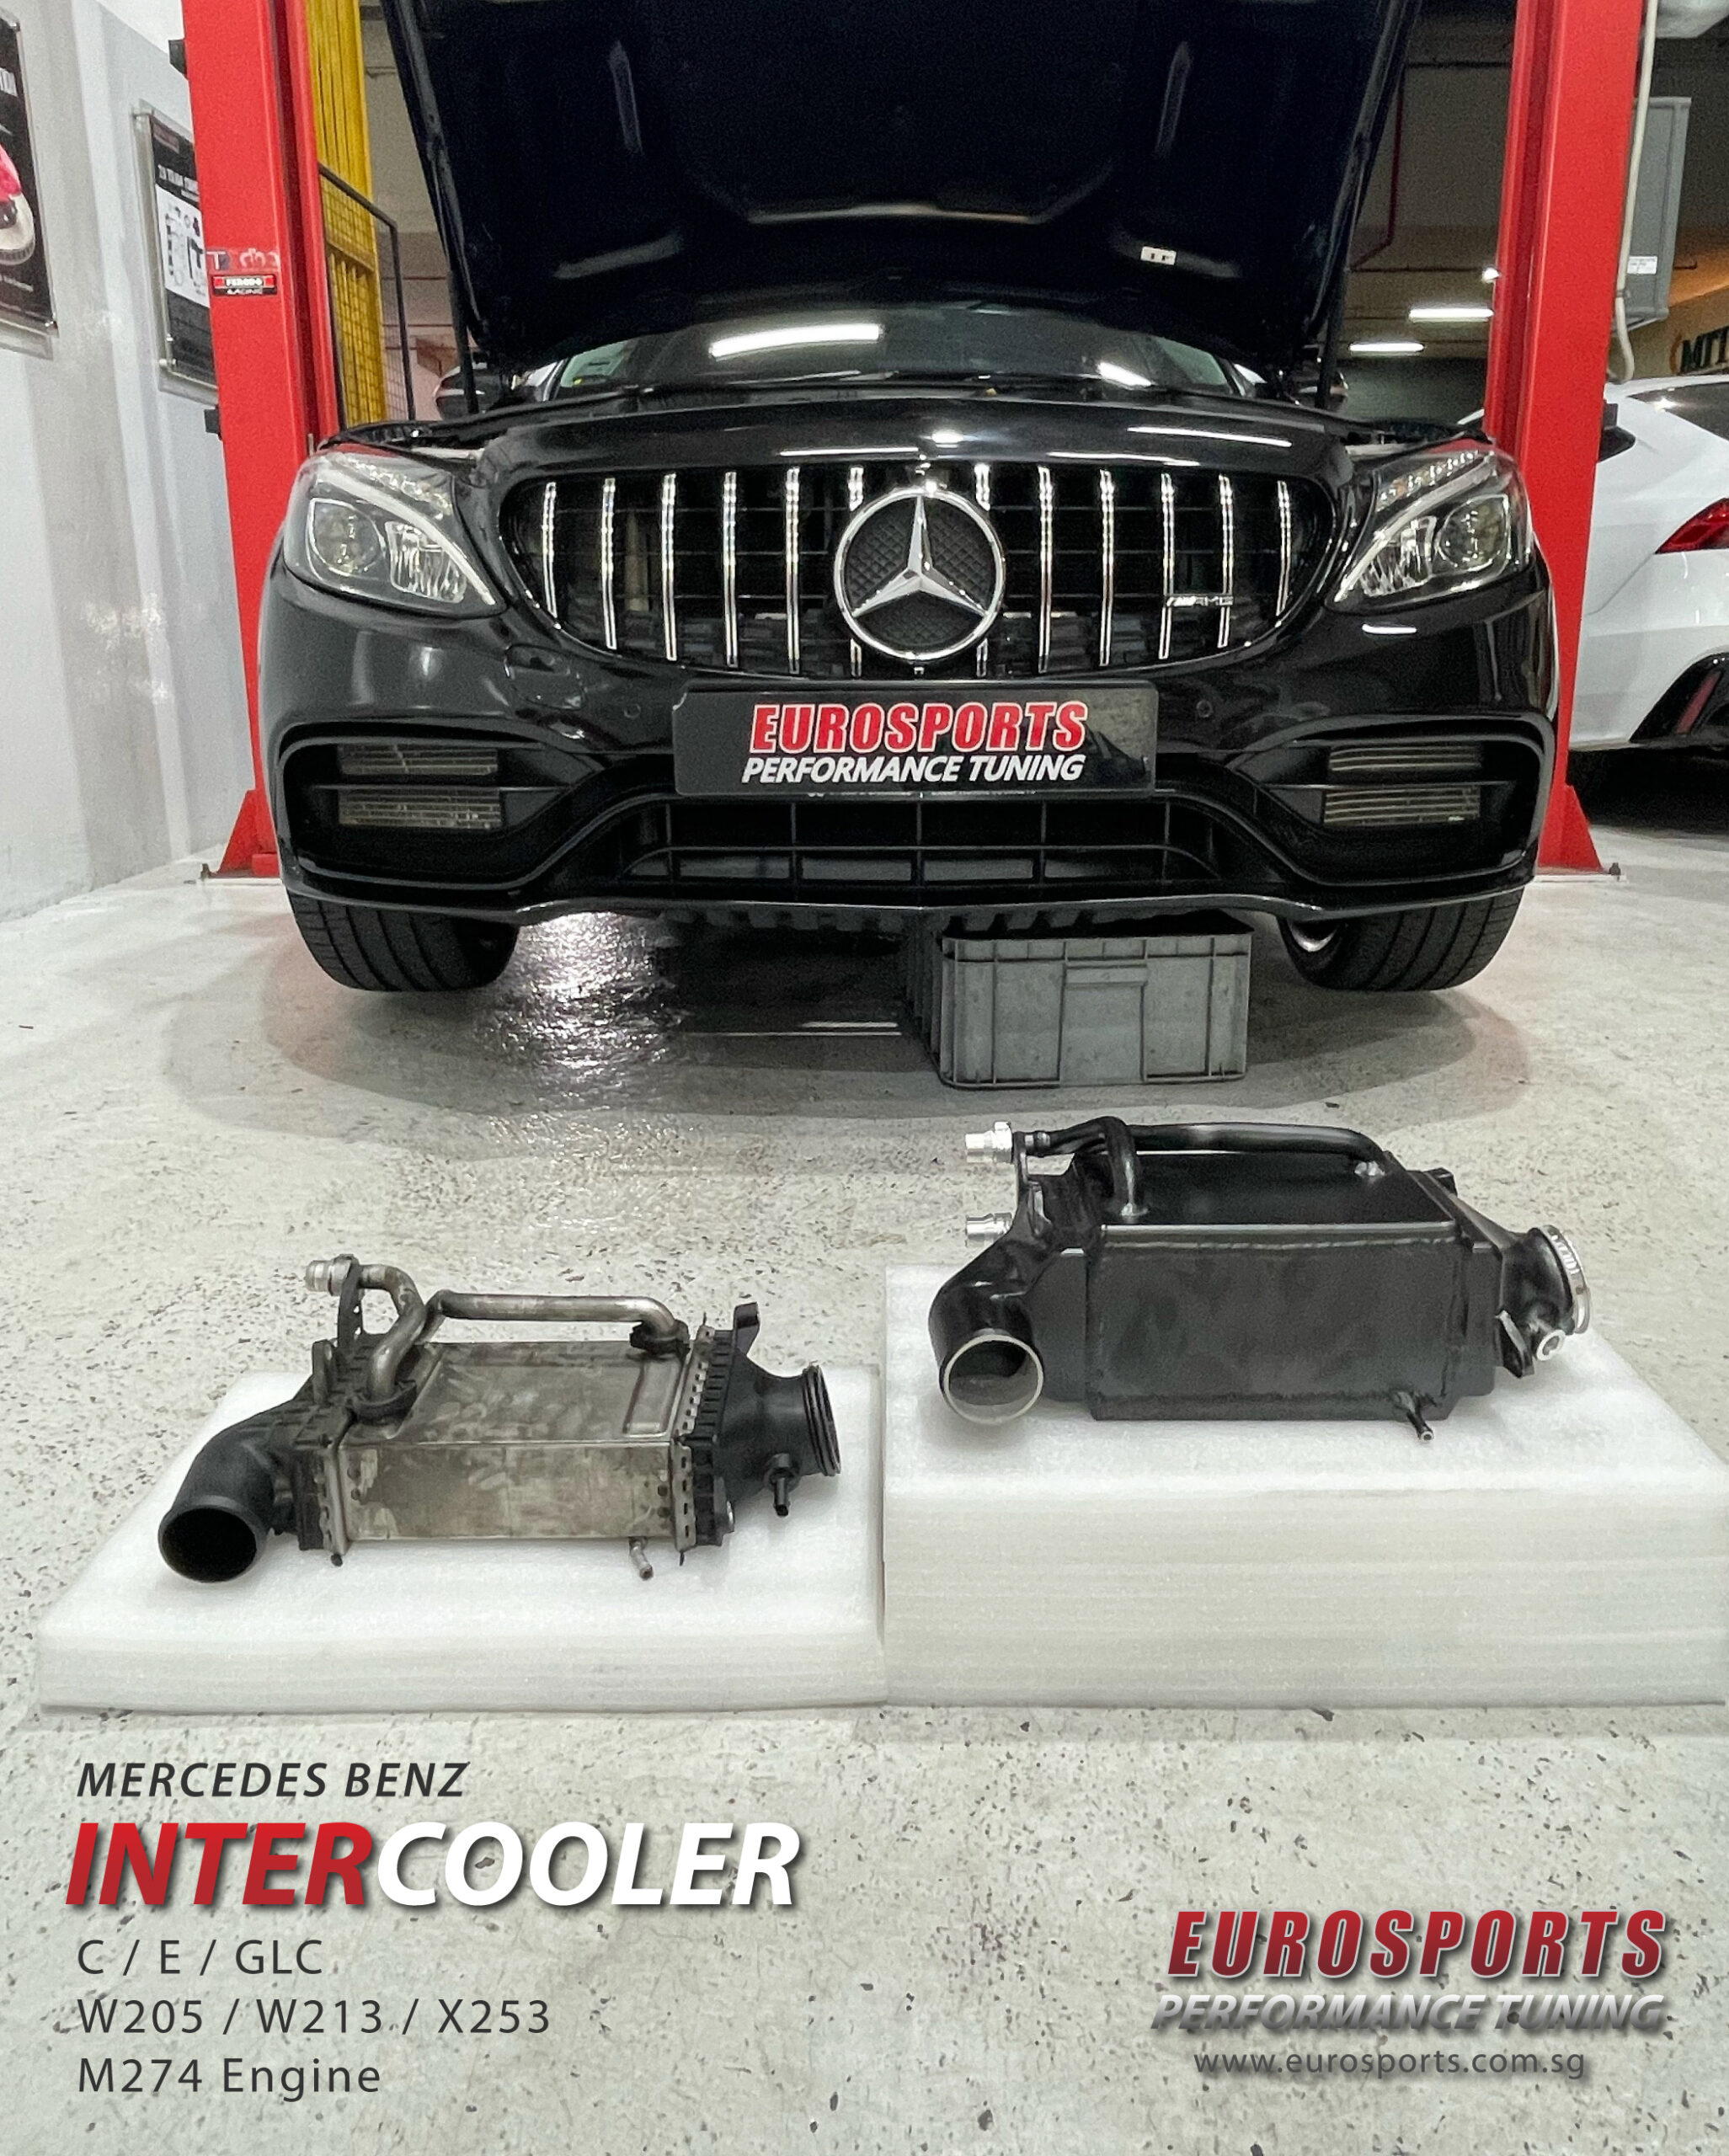 Intercooler Upgrade For Mercedes Benz W205 / W213 / X253 M274 1.6L and 2.0L  Engines